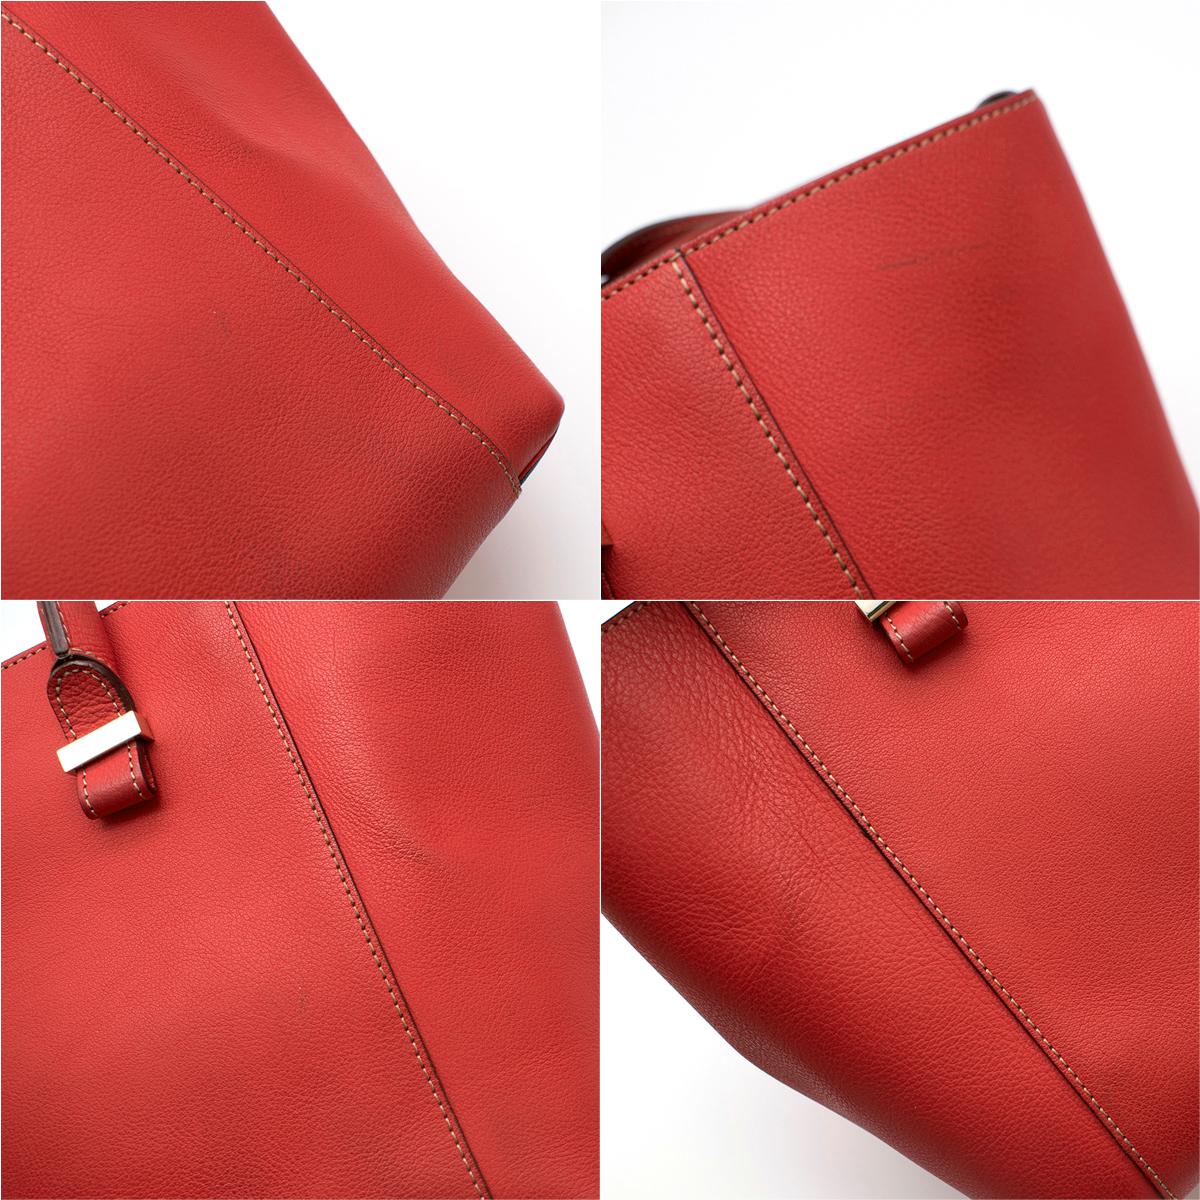 Victoria Beckham Red Liberty Leather Tote bag   4